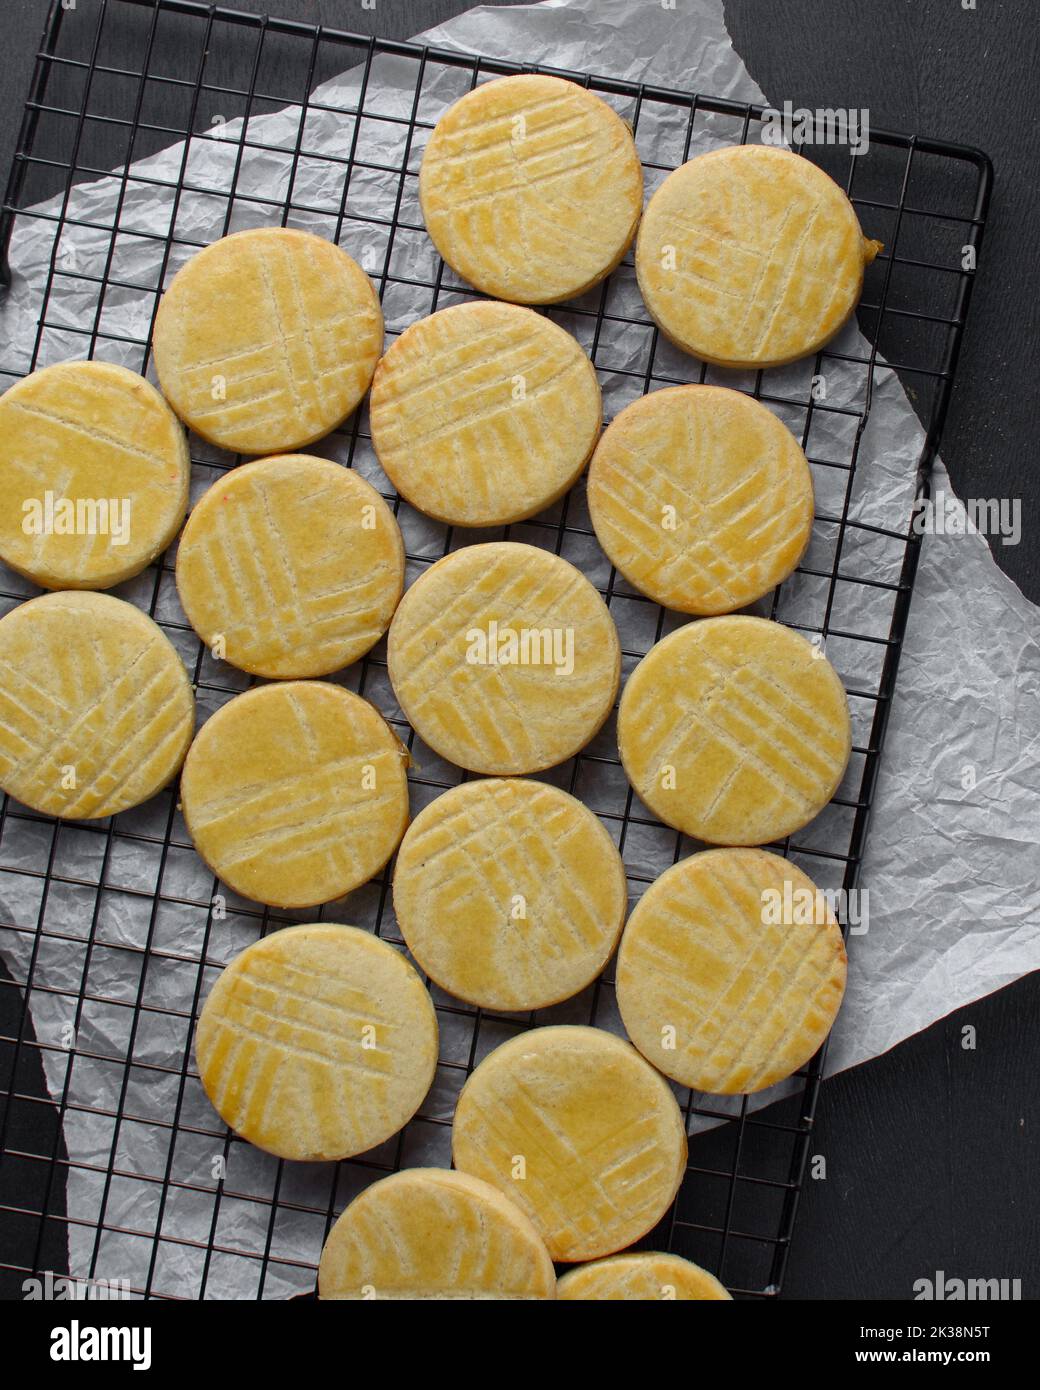 Palets Bretons (French Butter Cookies)